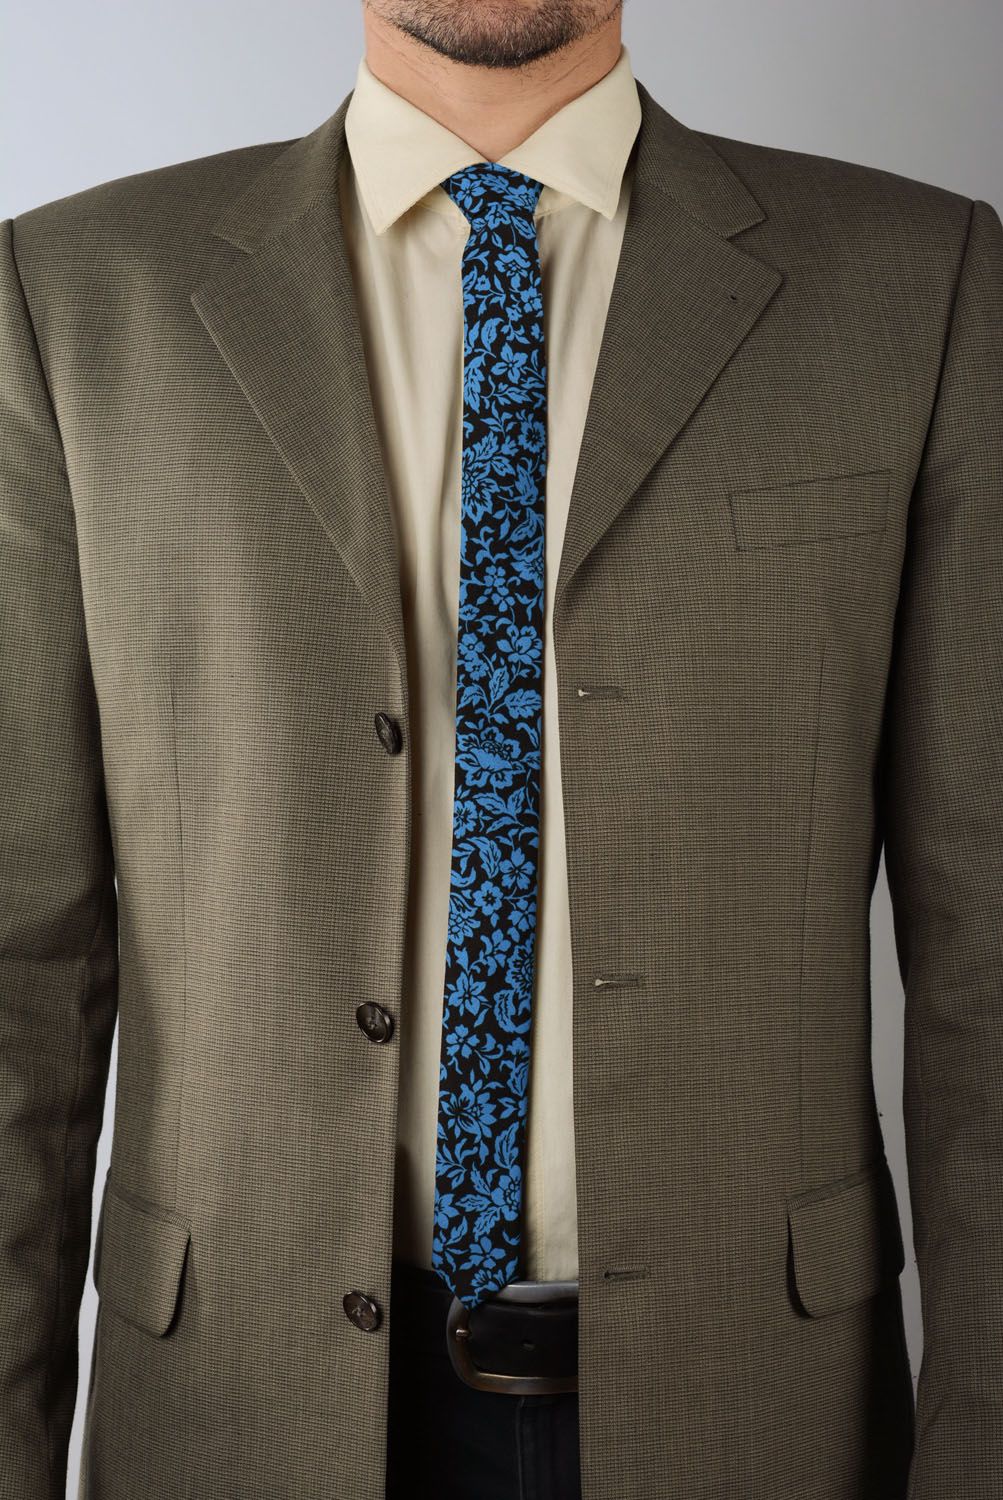 Tie Blue and Black photo 1